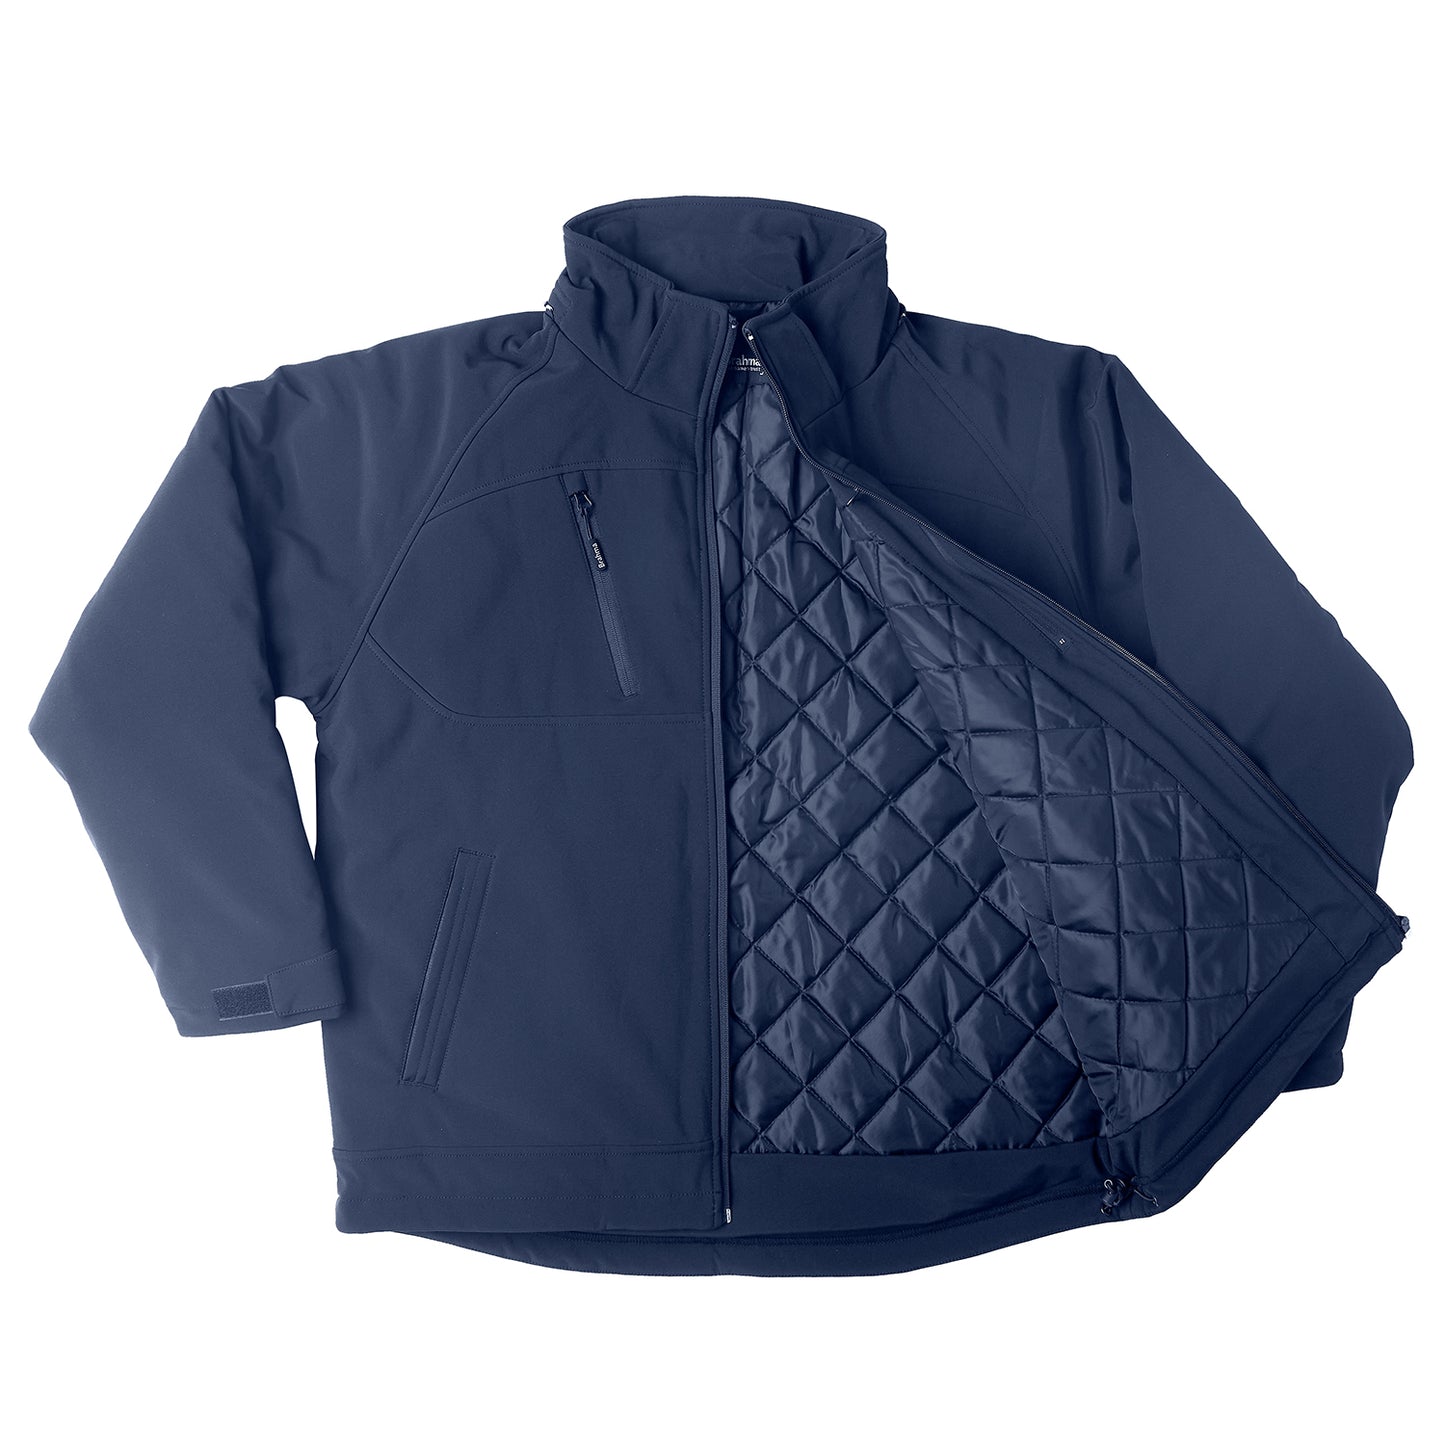 Brahma Cradle Mountain Series 2 Jacket - Navy open with hood removed